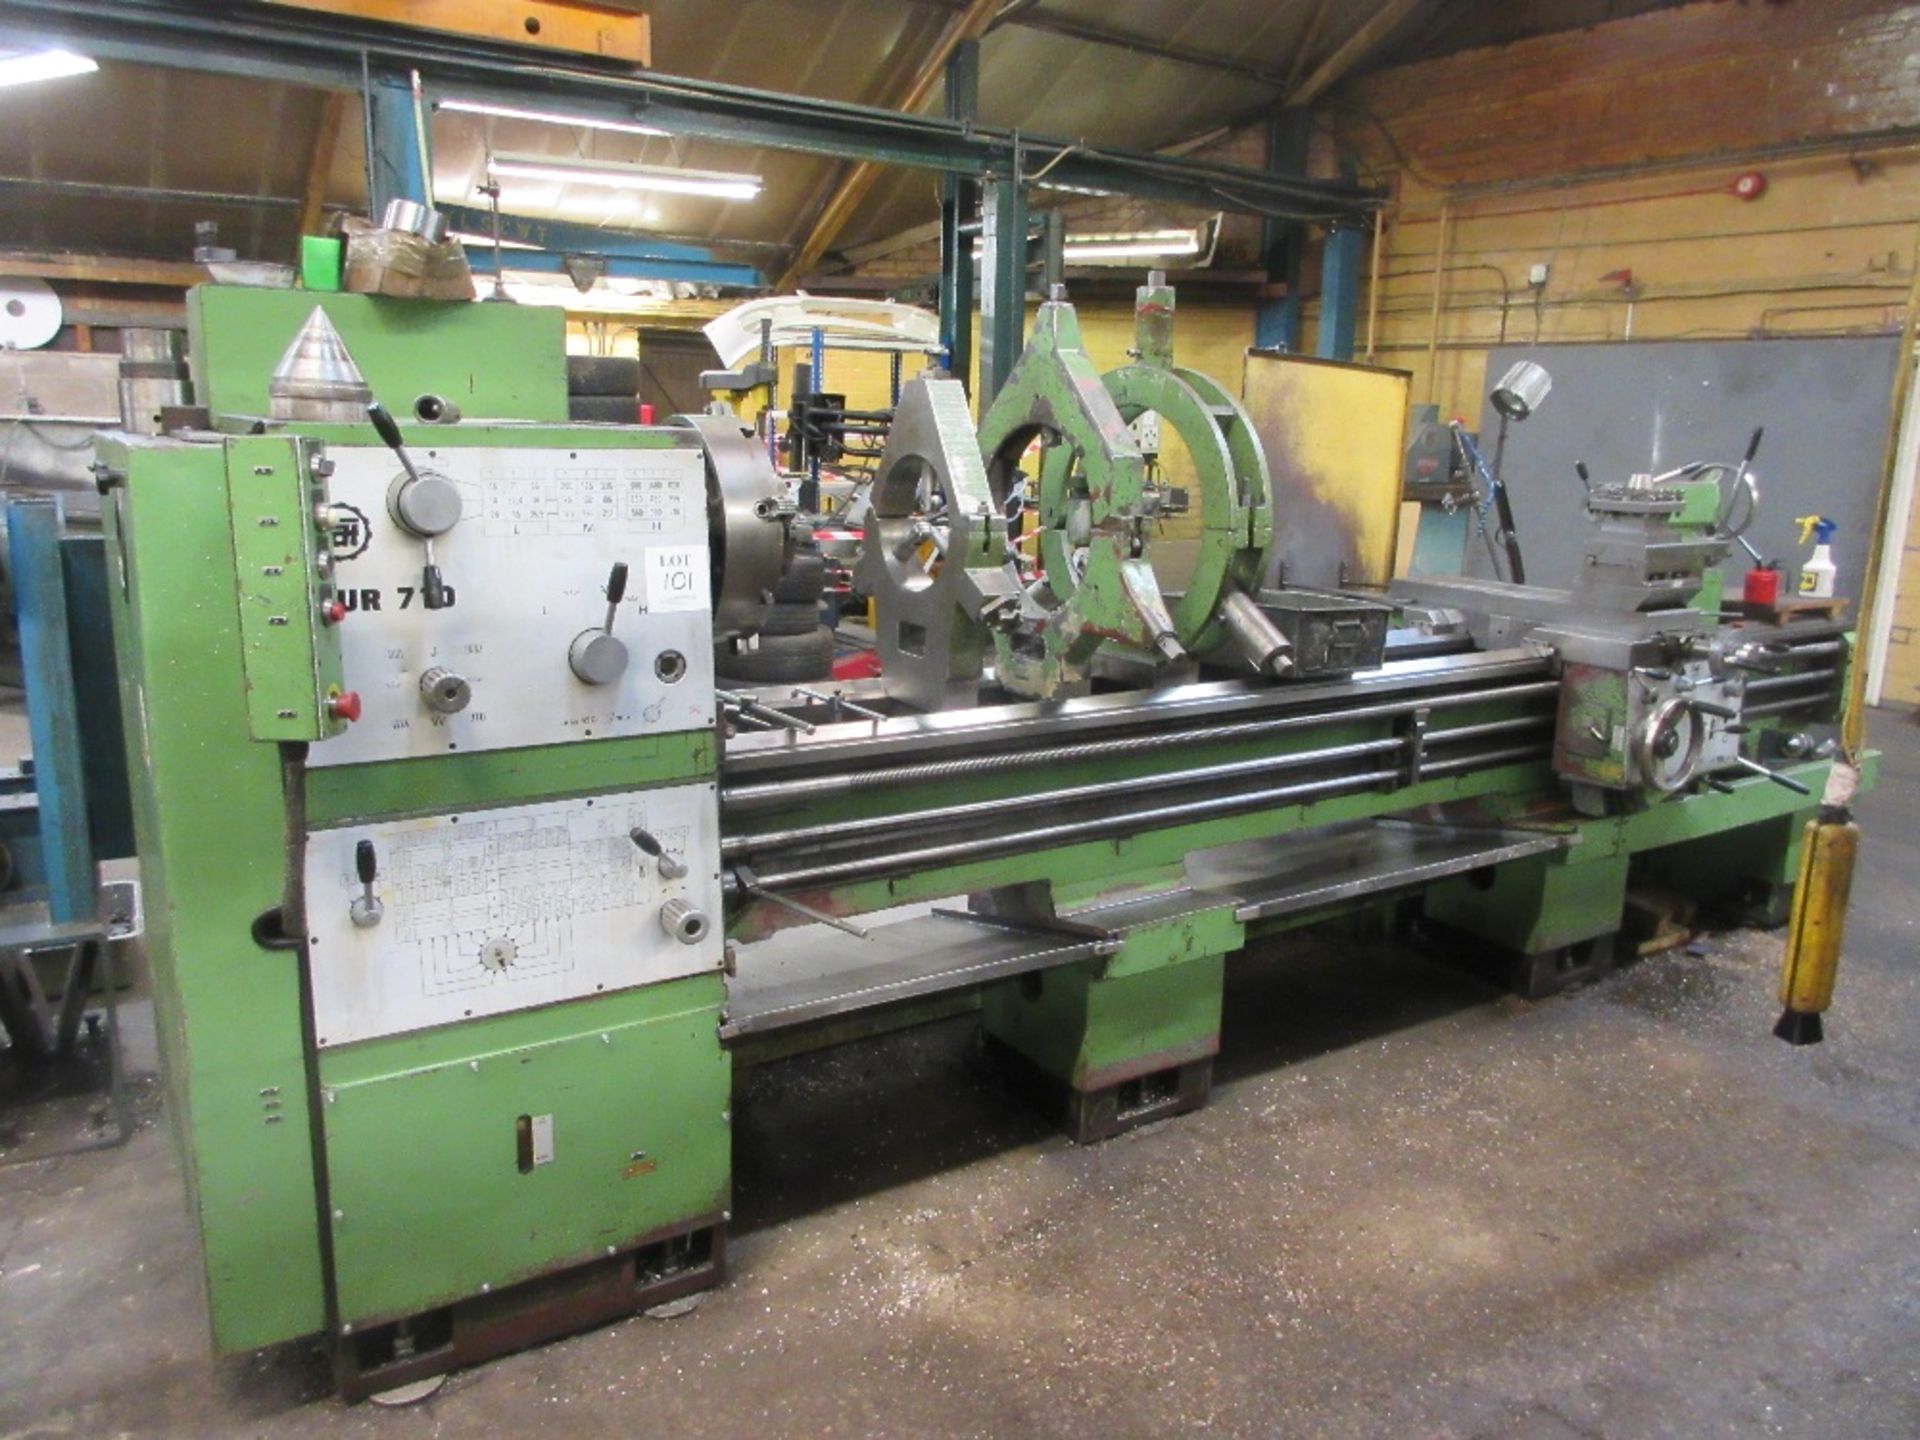 Tarnow TUR710 SS&SC centre lathe 28" swing x 10ft between centres with 3 - dedicated steadies (